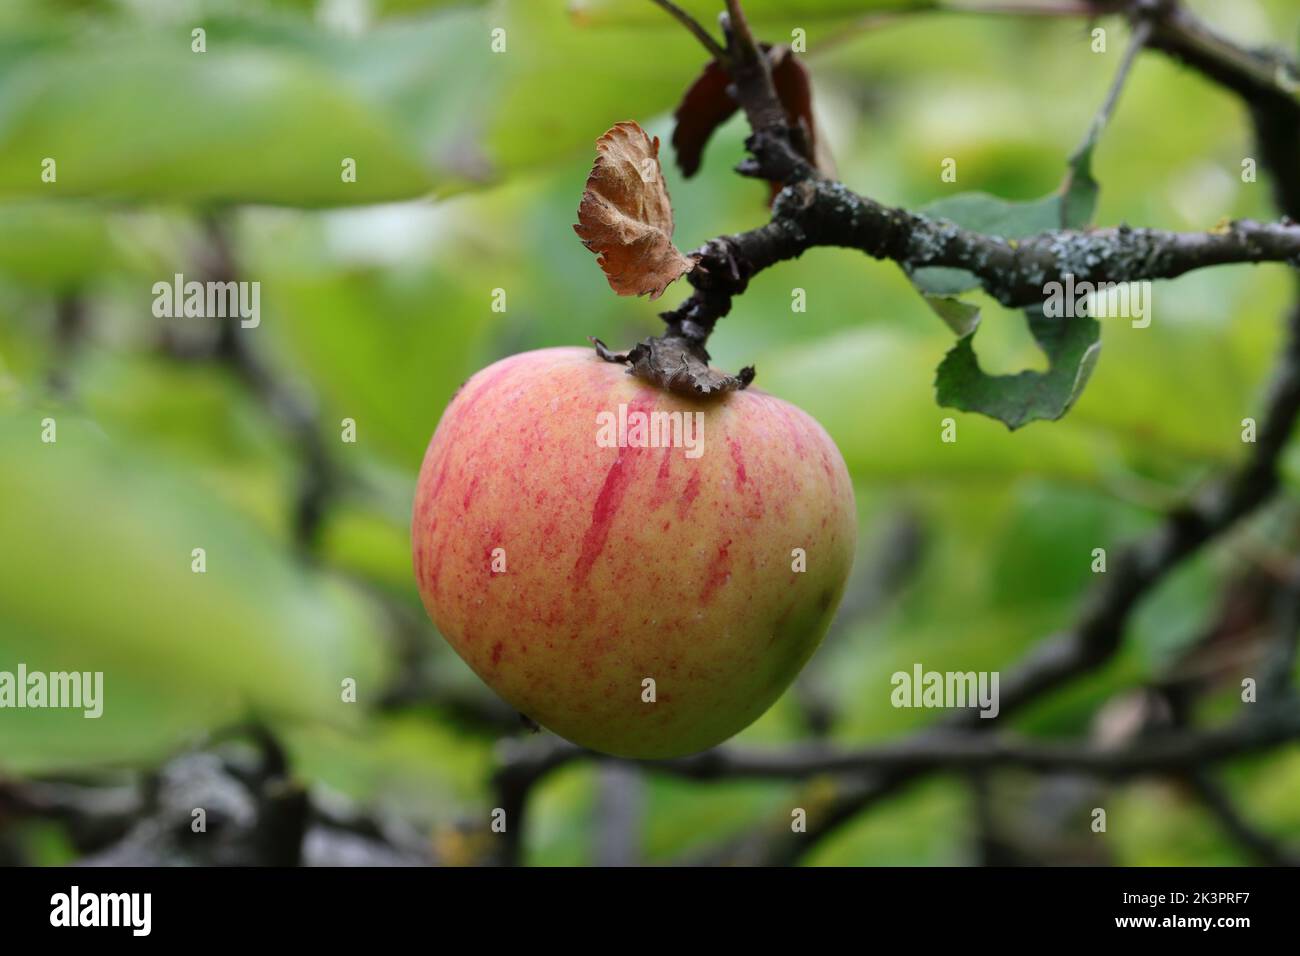 a beautiful single apple hangs ready for harvest still on the tree, side view Stock Photo